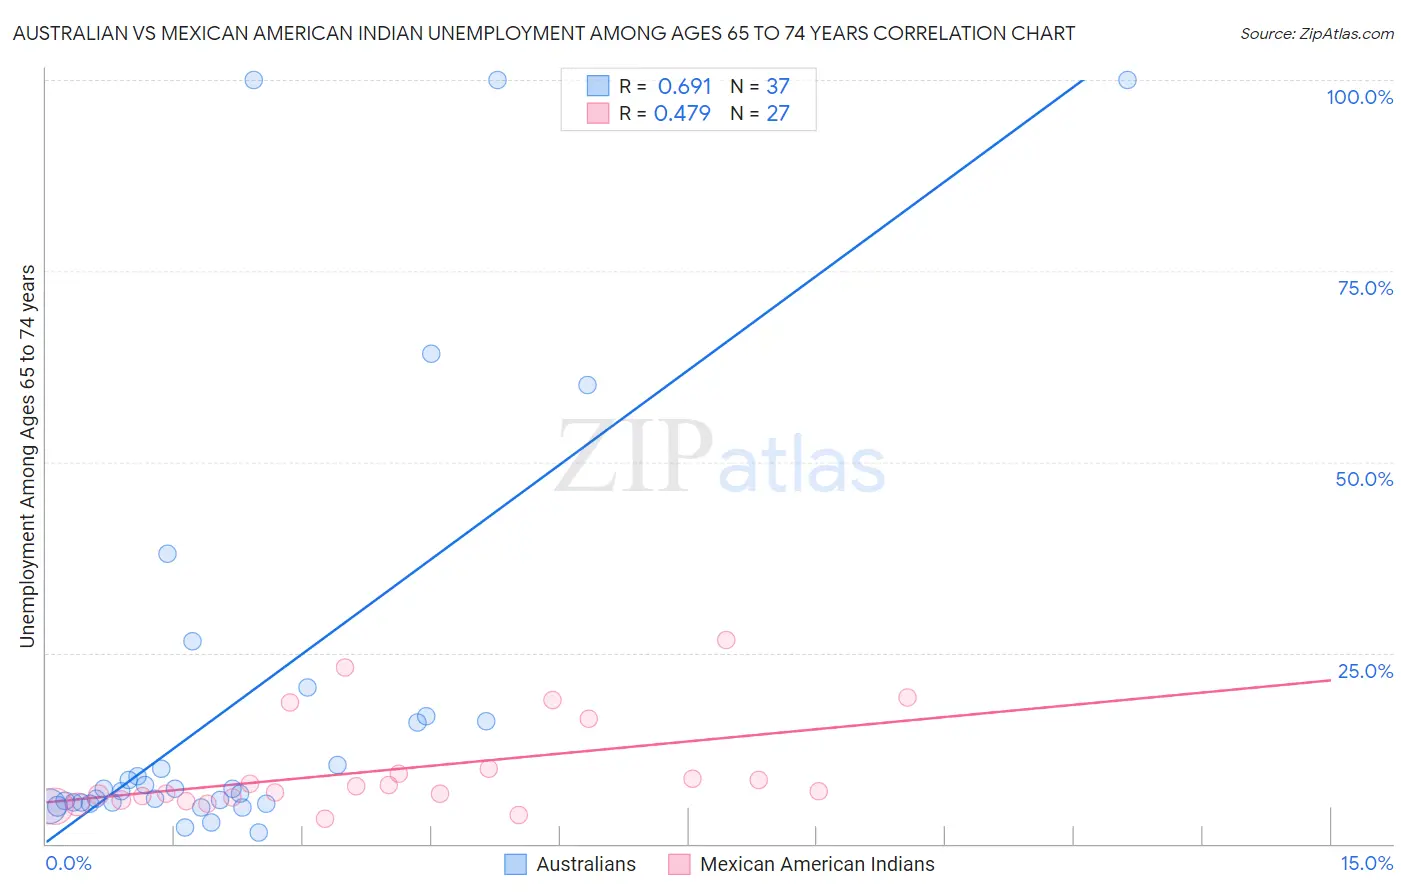 Australian vs Mexican American Indian Unemployment Among Ages 65 to 74 years